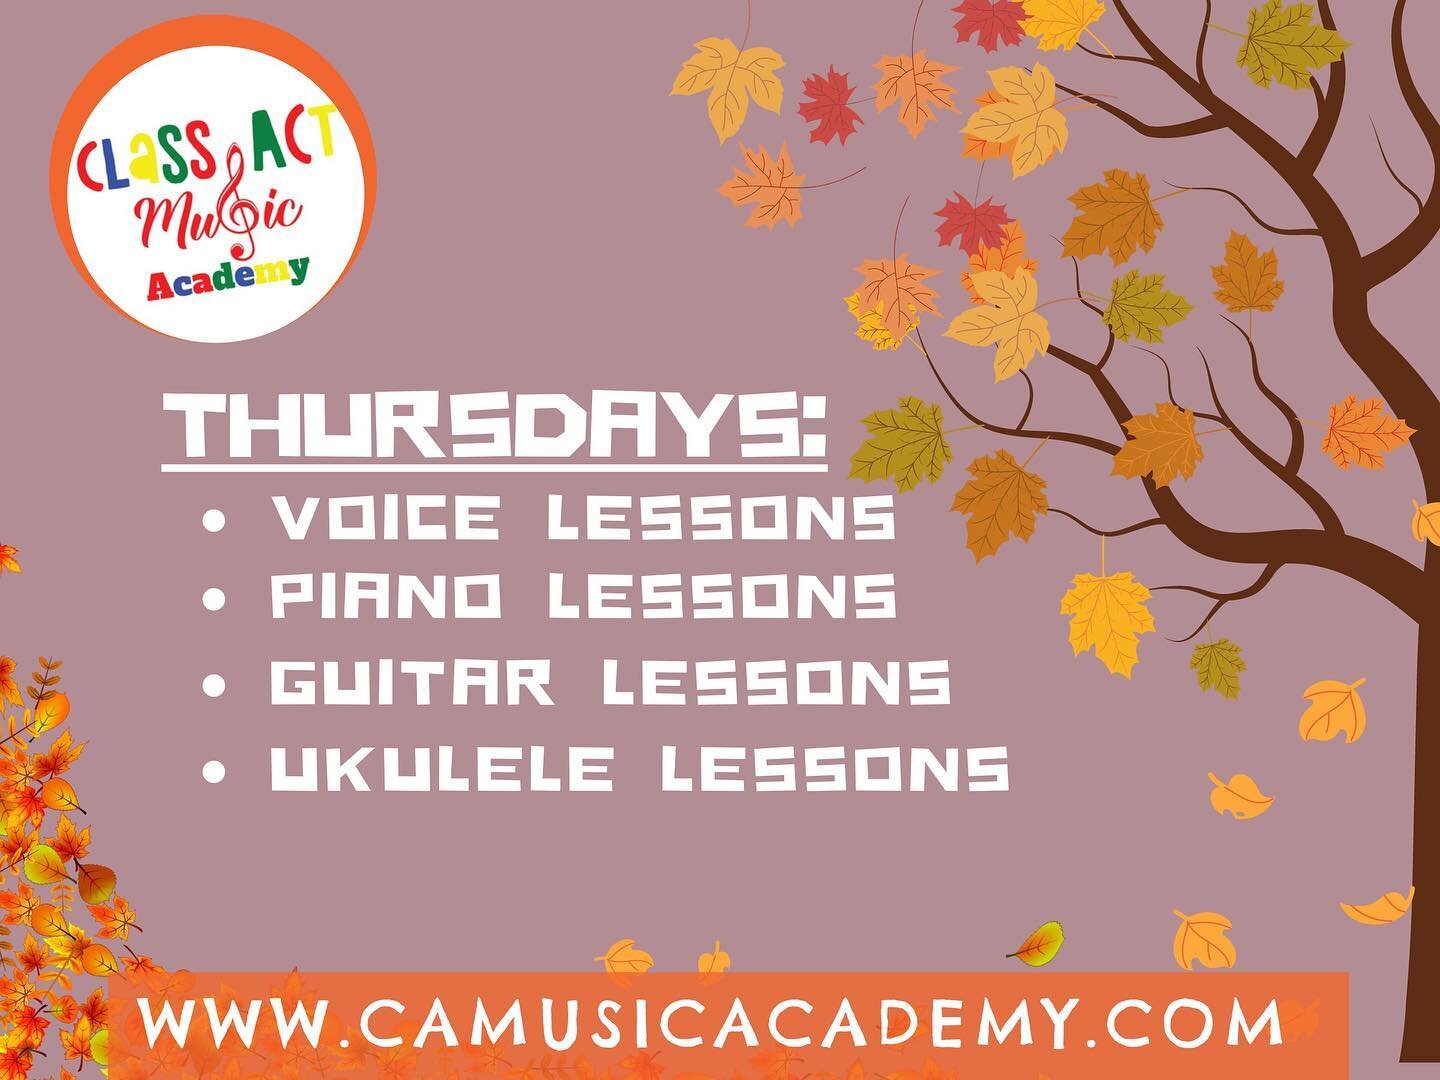 What&rsquo;s going on @cama_gilroy on Thursdays? You can take one of these fun private lessons with Ms. Michelle or Ms. Anna! Class Act Music Academy has private voice lessons, private piano lessons, private guitar lessons, and private ukulele lesson